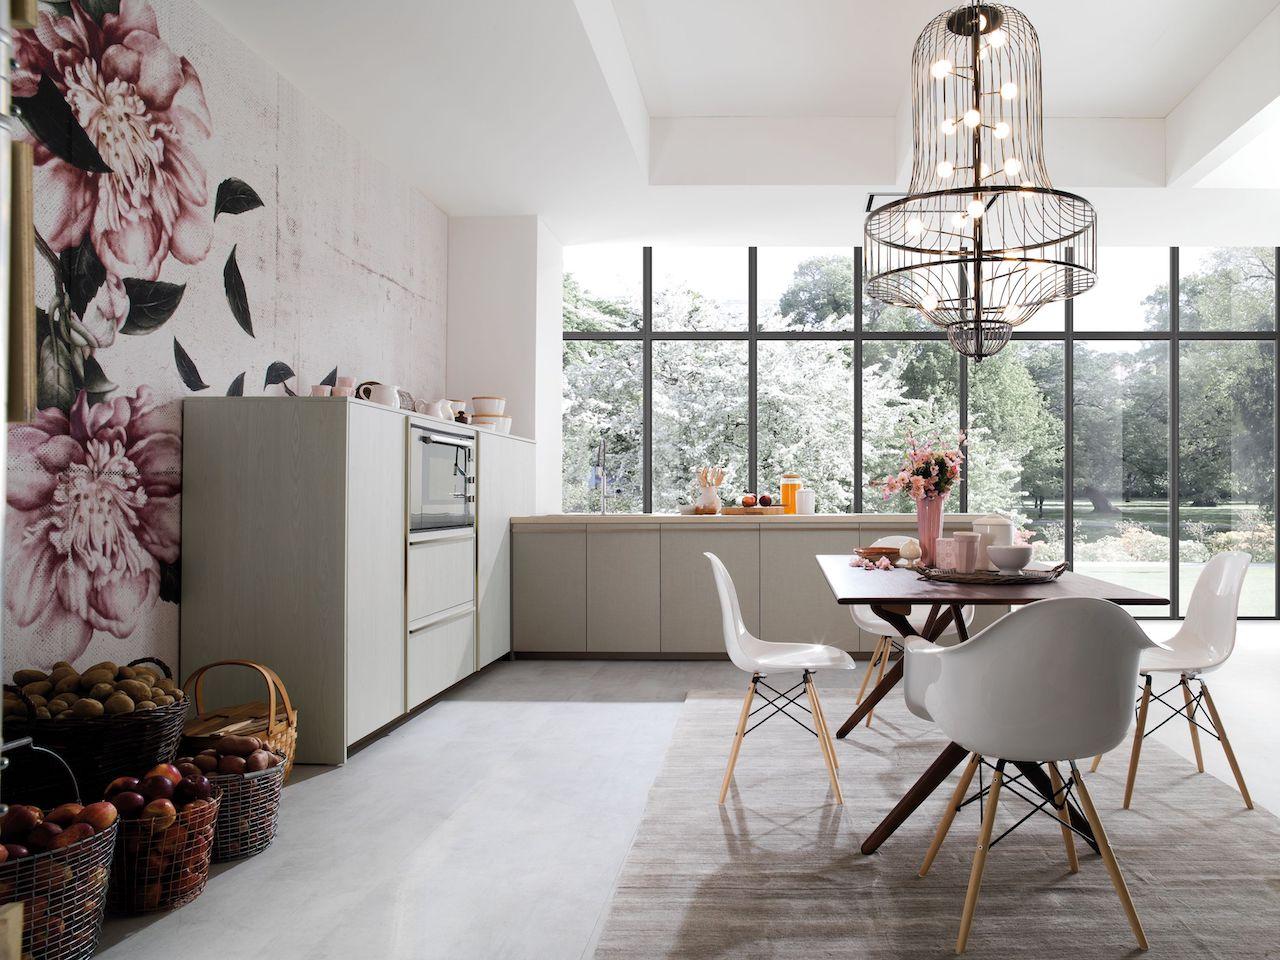 This Cheerful Kitchen Leaves You Pining For Spring